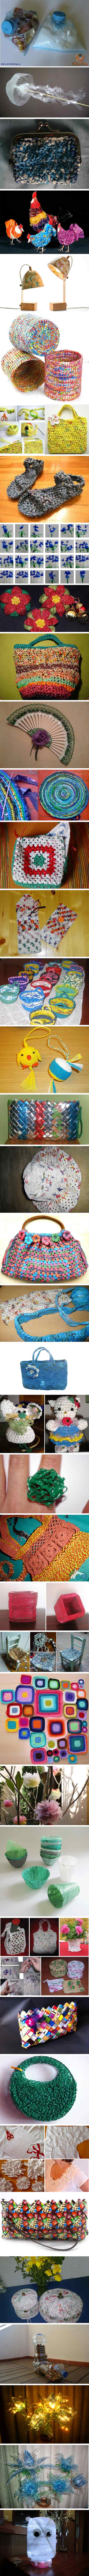 creative crafts recycling plastic bags 1